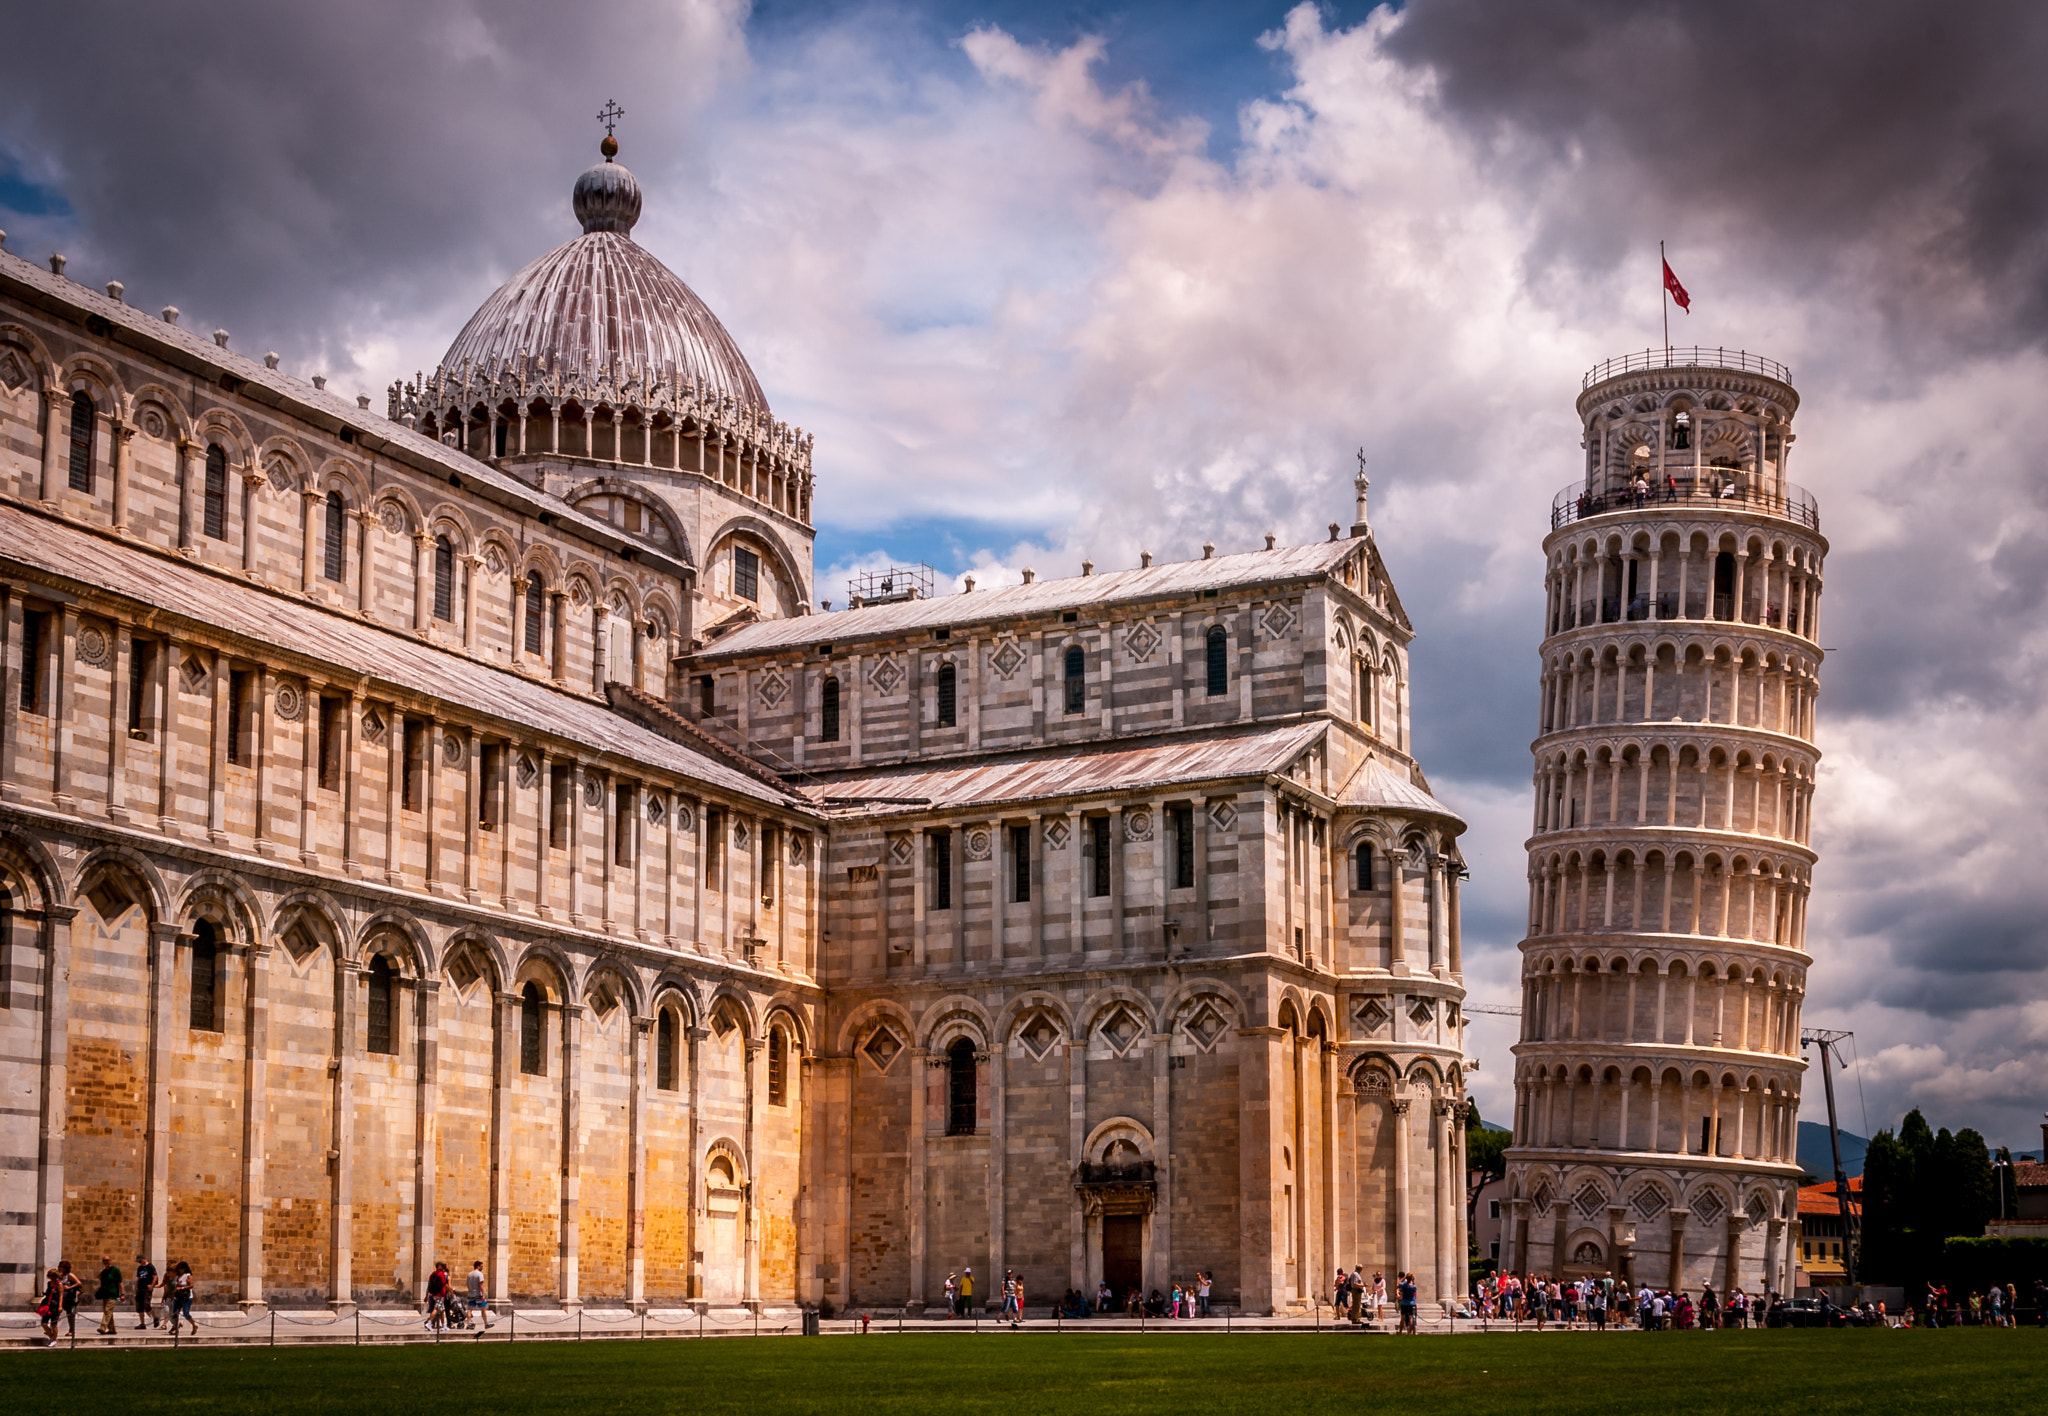 Nikon D80 + Sigma 17-70mm F2.8-4 DC Macro OS HSM | C sample photo. Leaning tower of pisa photography